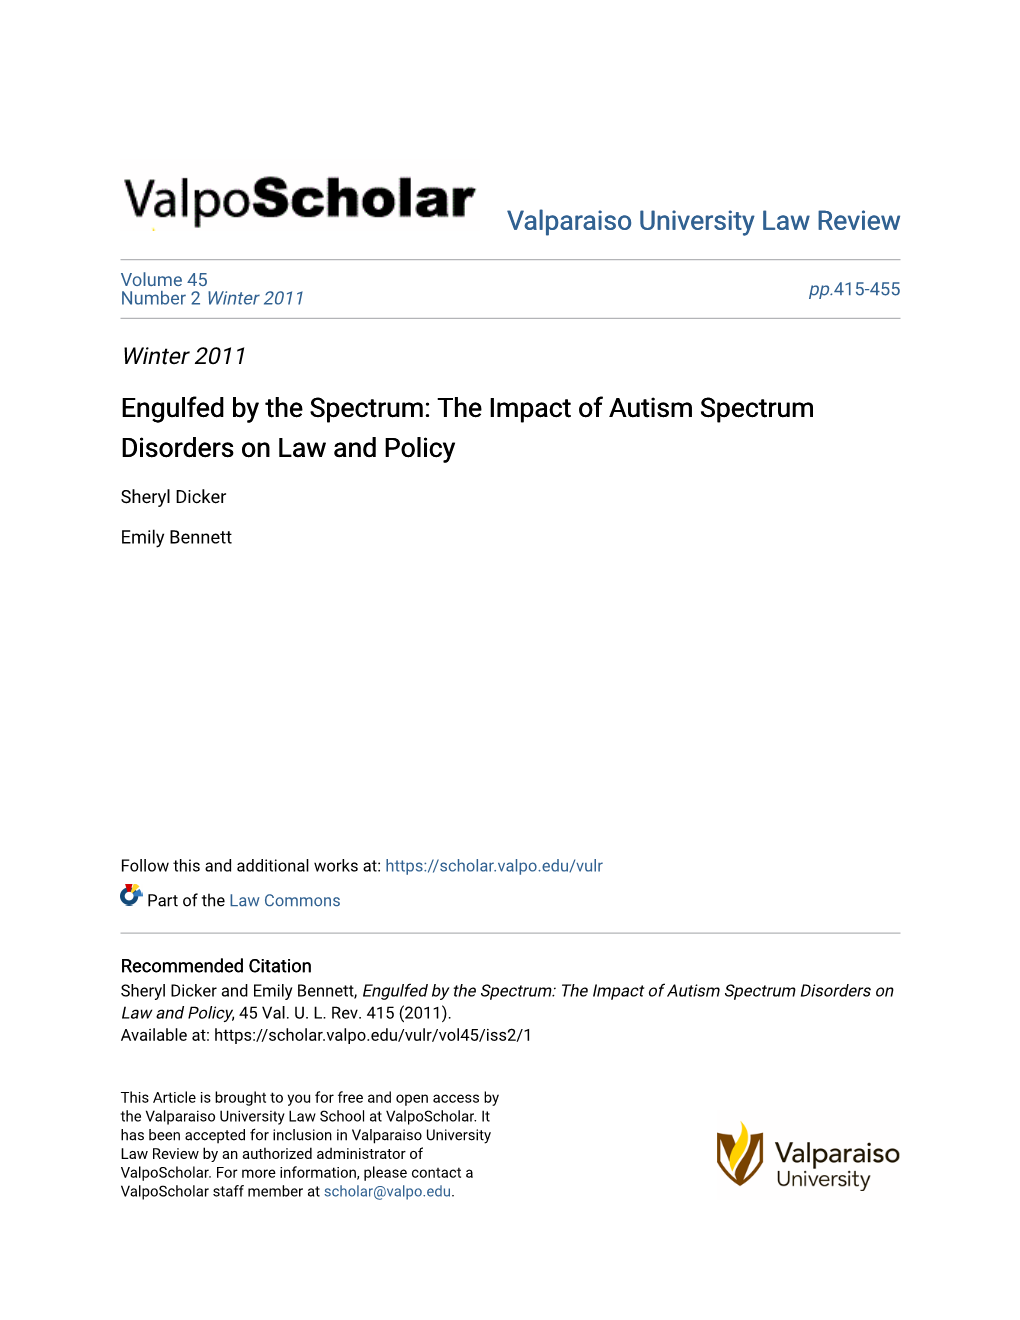 The Impact of Autism Spectrum Disorders on Law and Policy